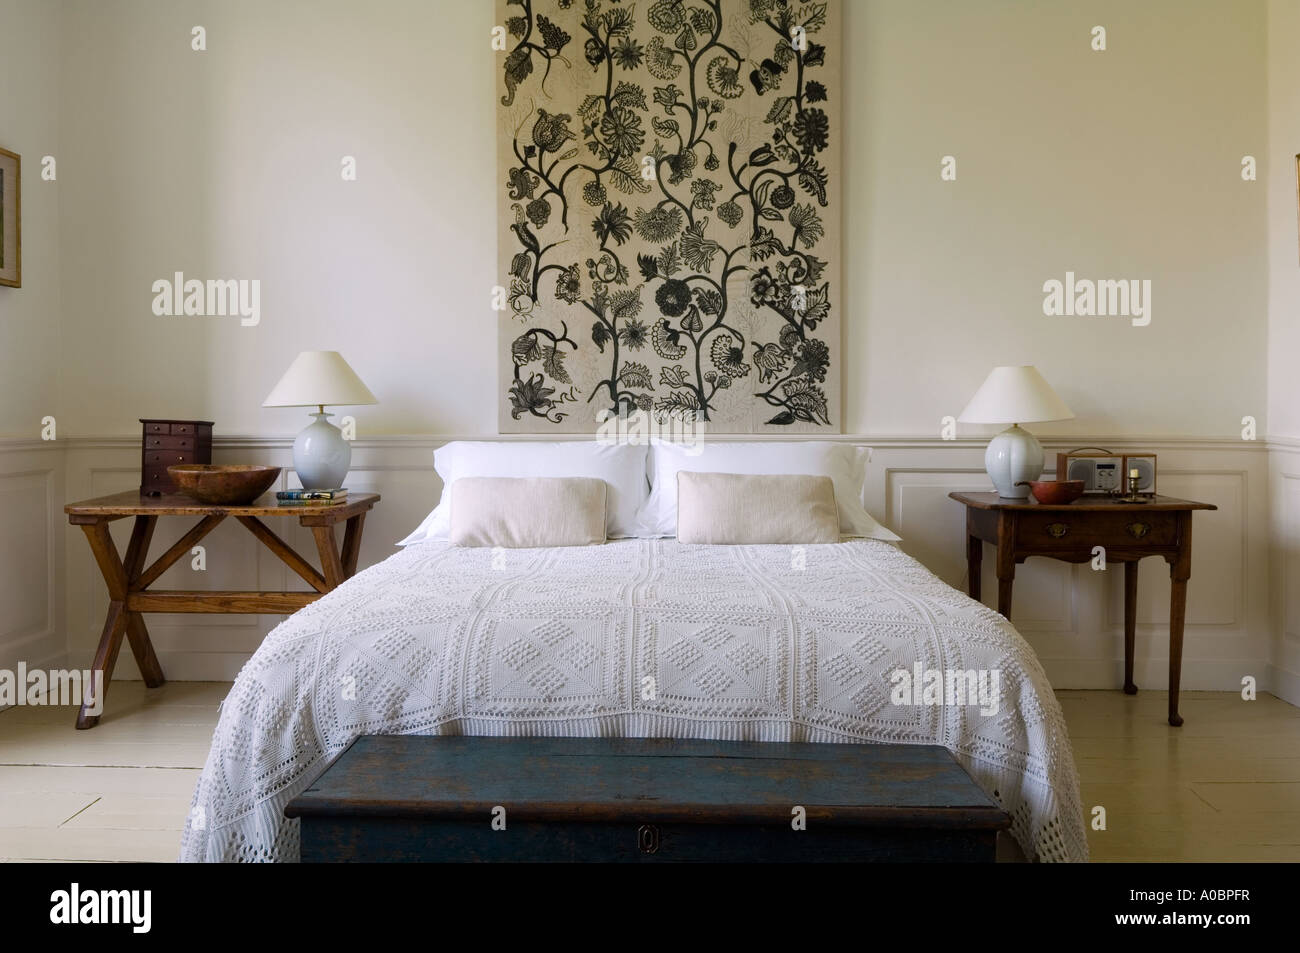 Floral patterned wall hanging above double bed with side tables Stock Photo